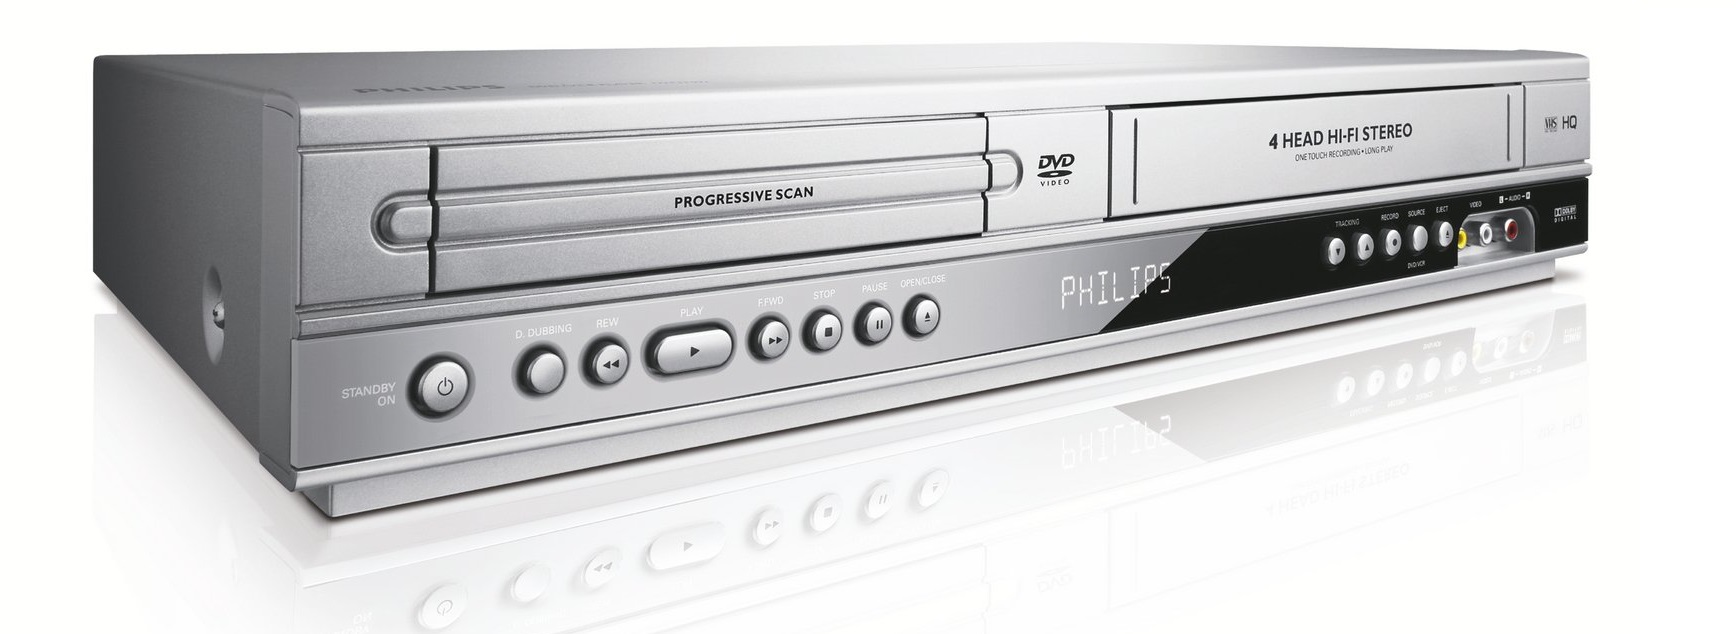 Used Philips DVP3340V DVD/VCR 4 Head Player Combo with Remote, Manual, A/V Cables and HDMI Converter - image 2 of 4